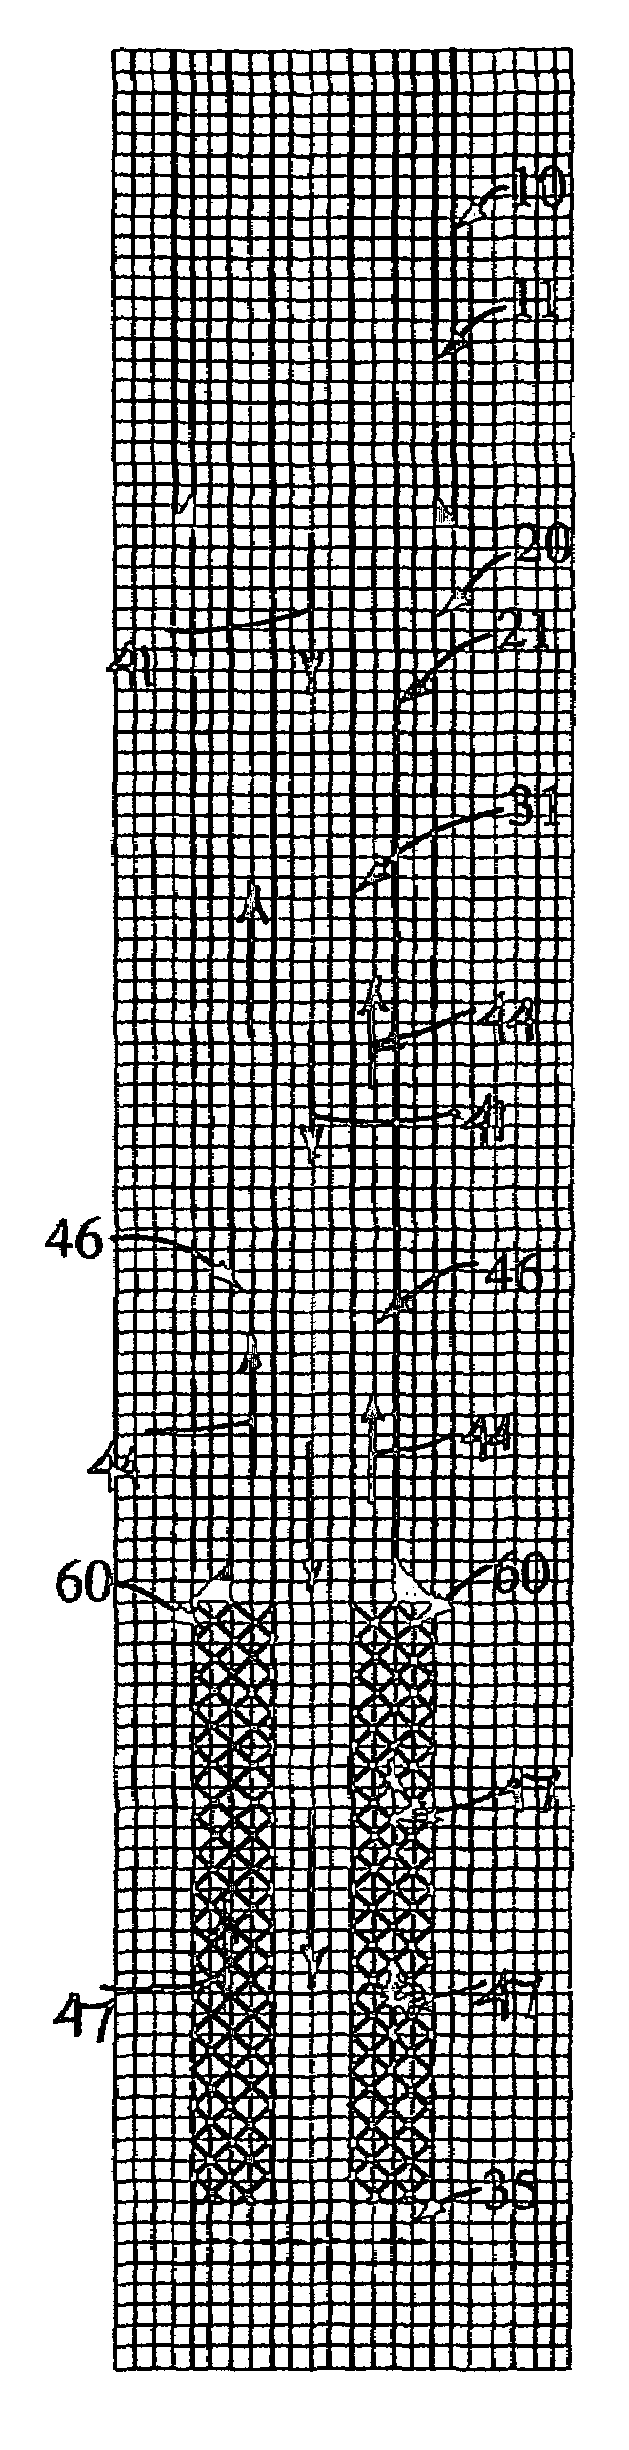 Method for growth of a hydraulic fracture along a well bore annulus and creating a permeable well bore annulus